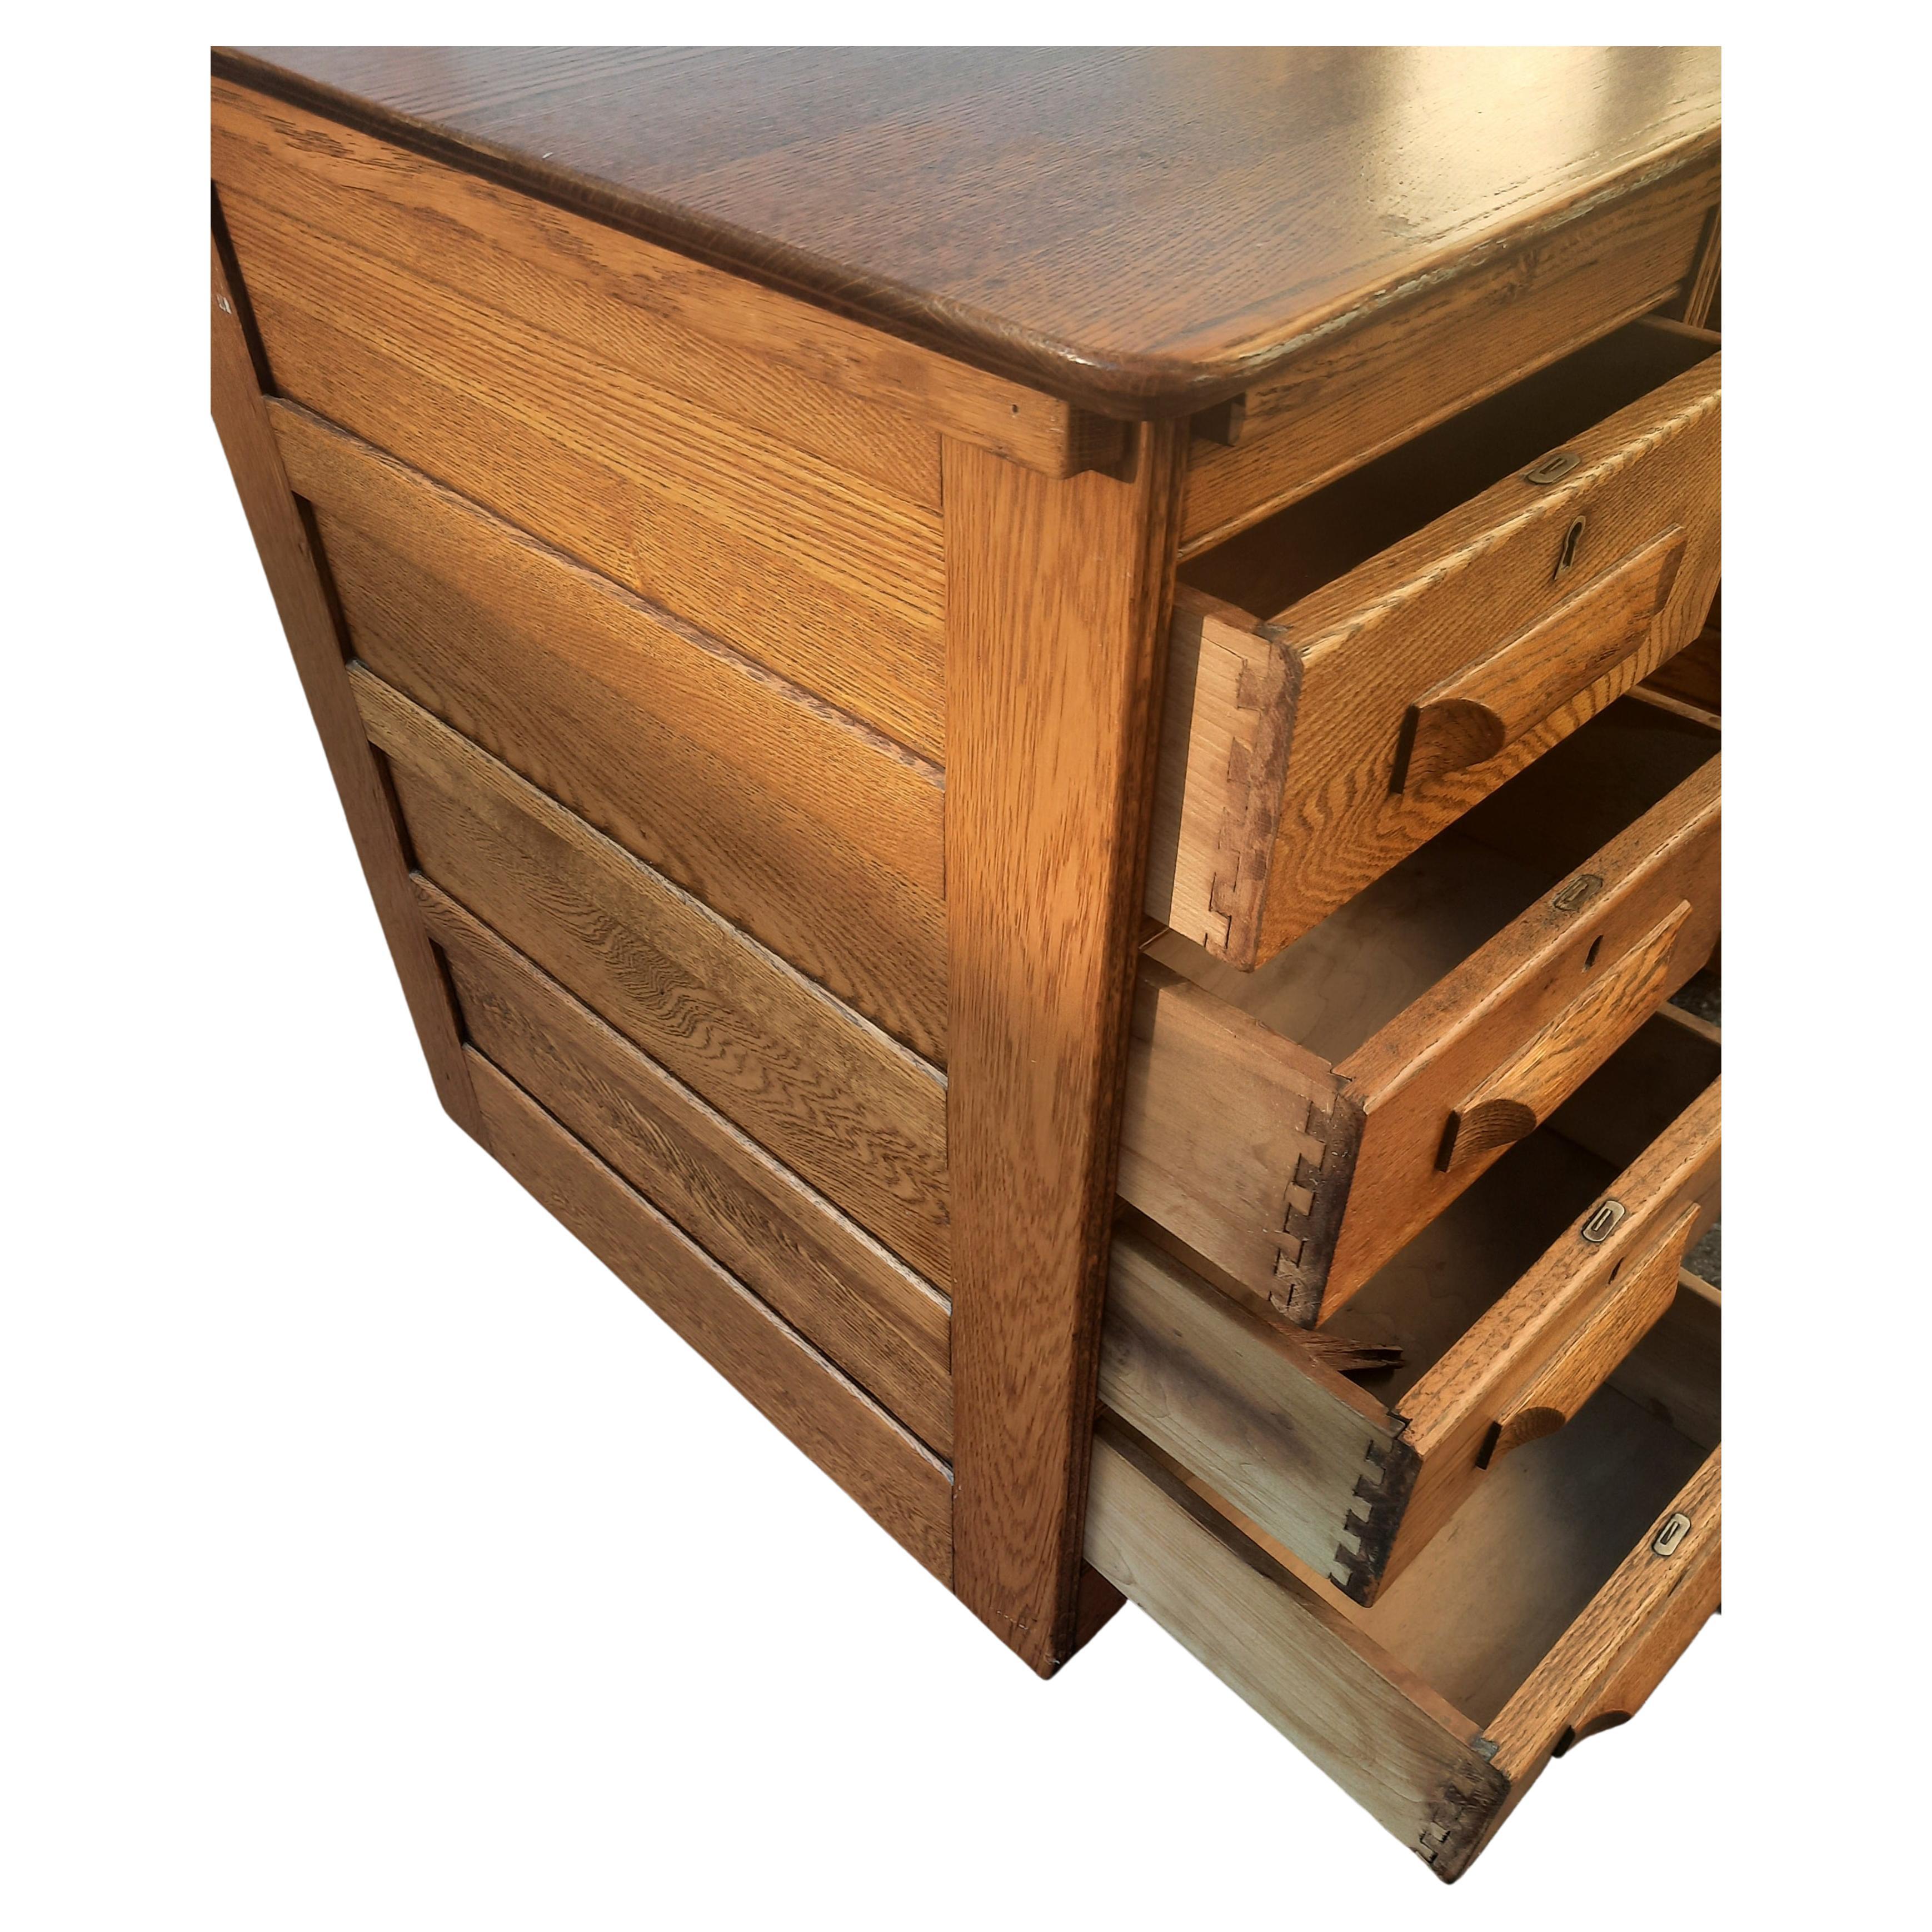 Hand-Crafted Handcrafted Solid Oak Partners Desk Writing Desk on Wheels, circa 1960 For Sale